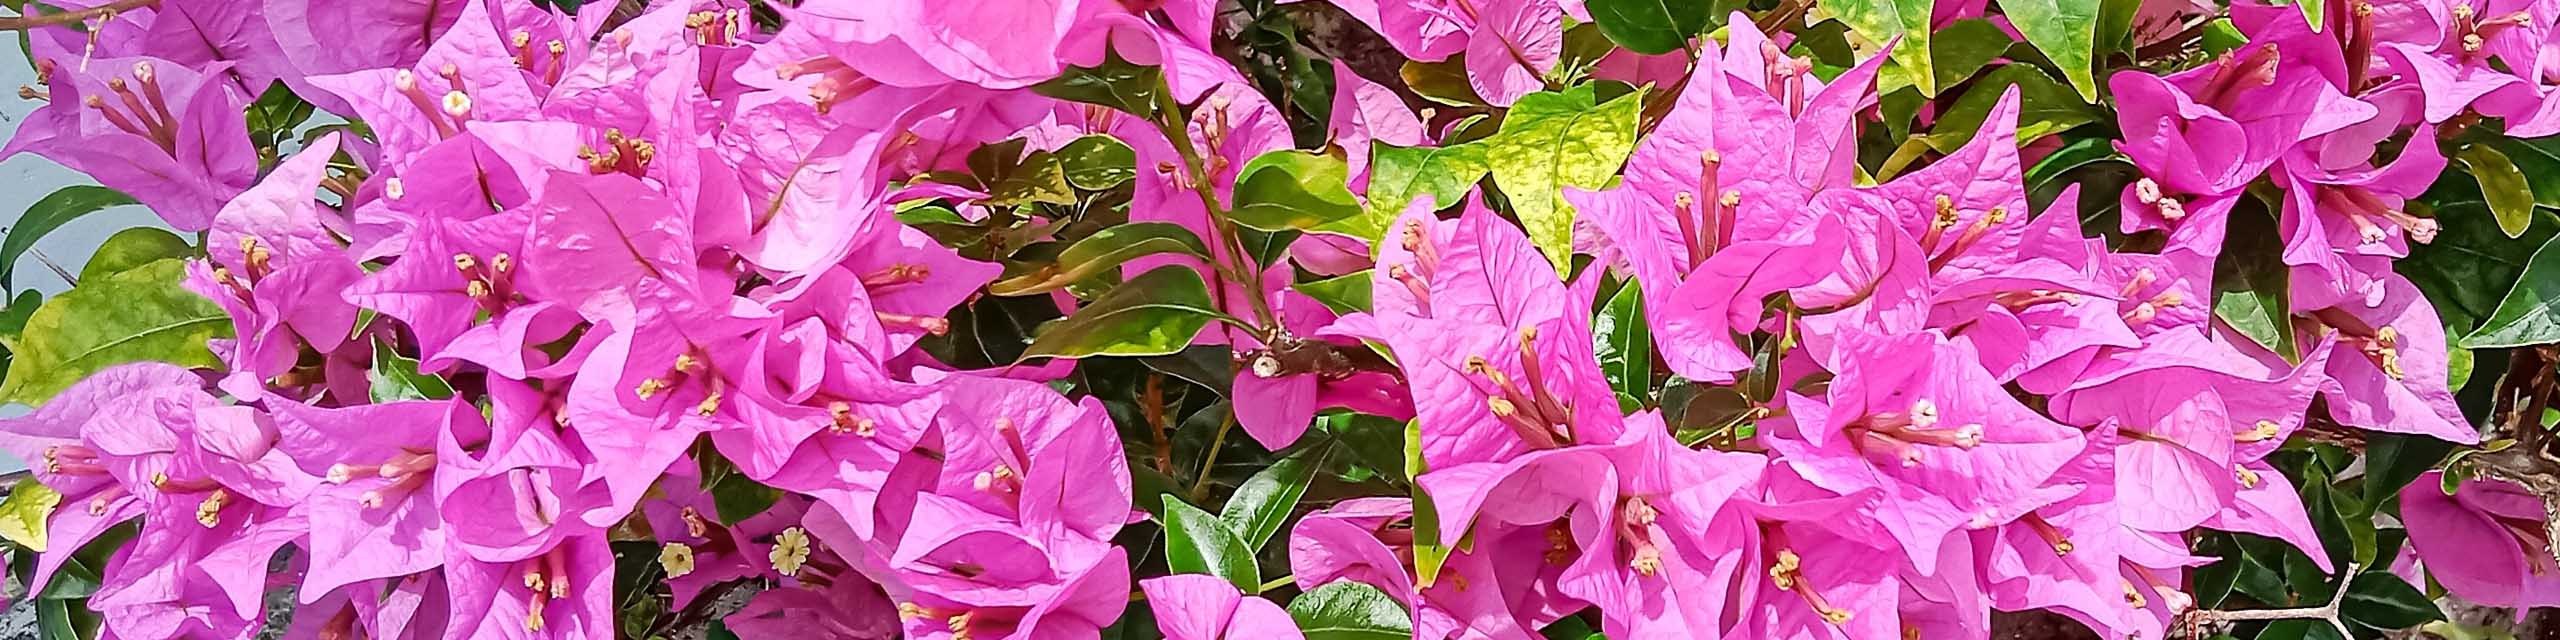 Close up of pink flowers of a Bougainvillea vine.